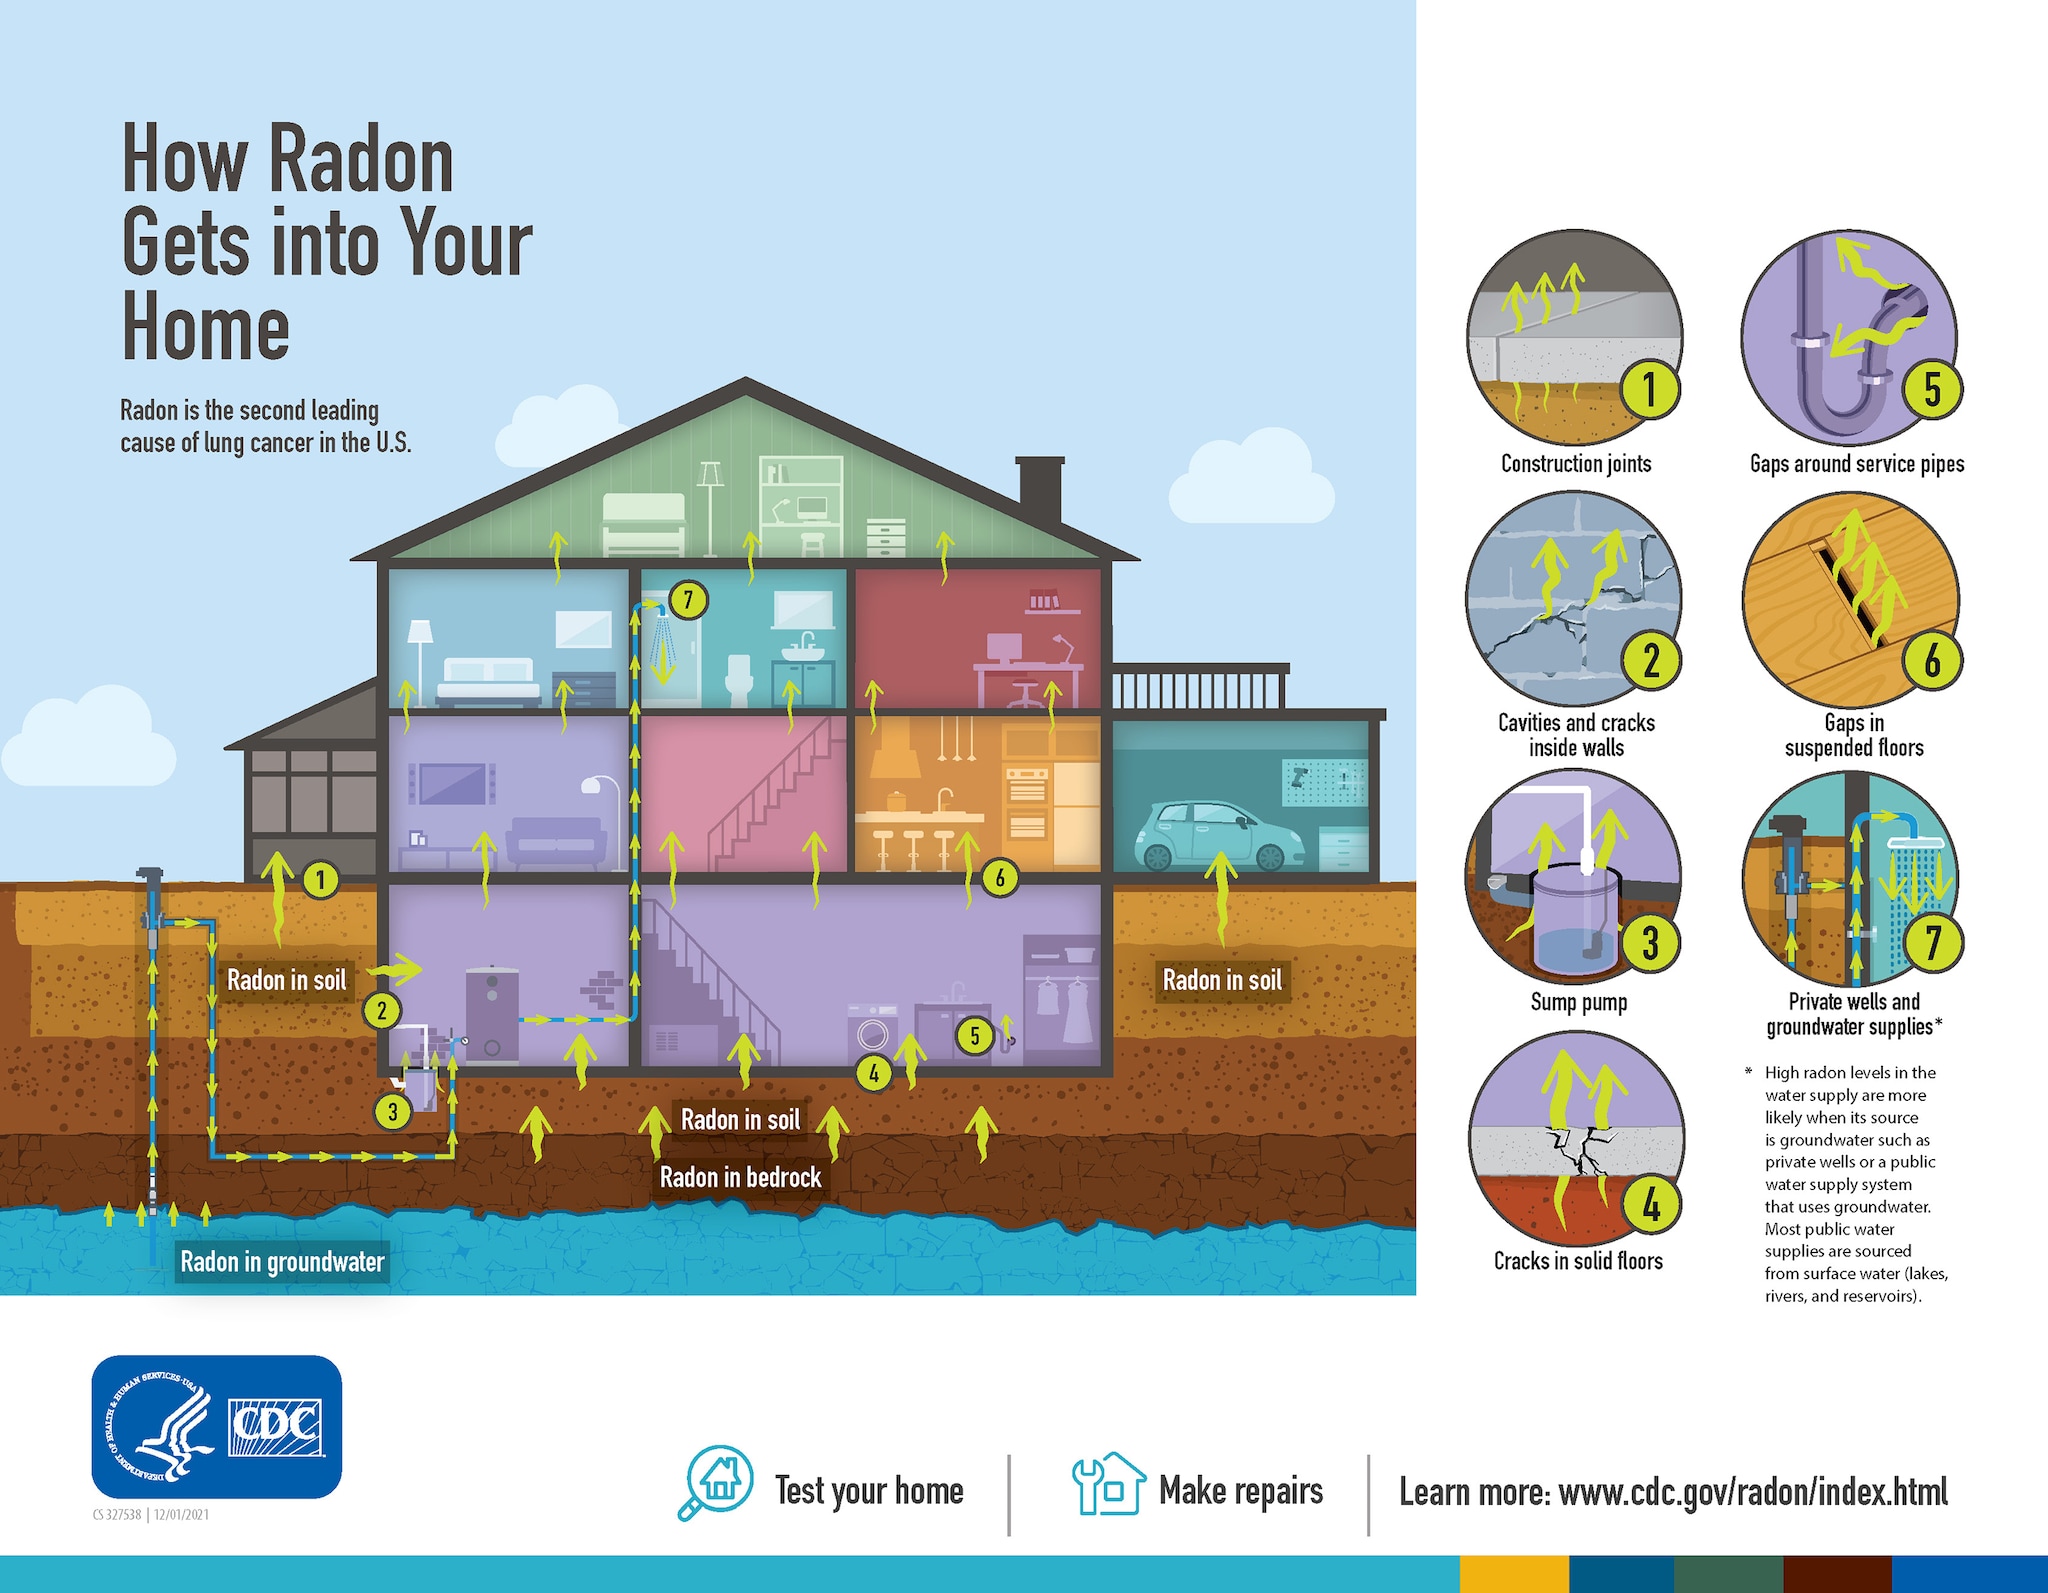 Get the Facts on Radon, NCEH